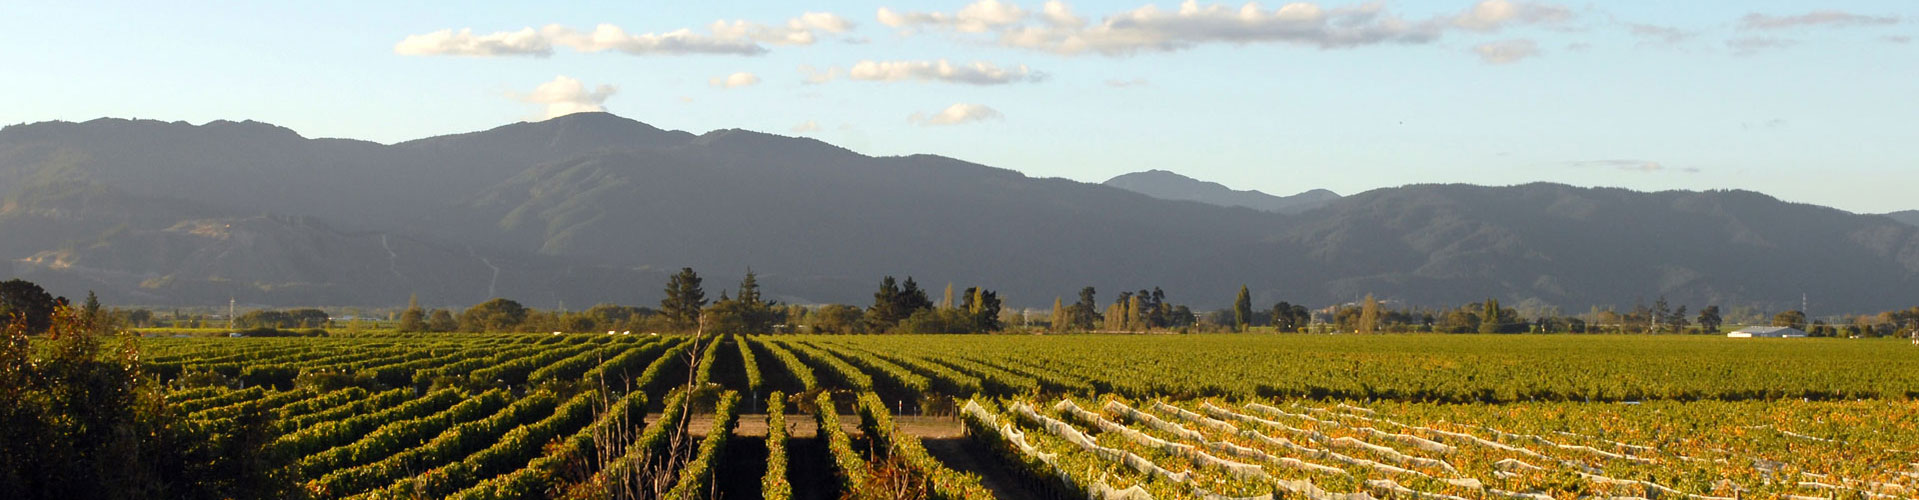 Mountains in the distance as seen from the Fromm Winery vineyard in Marlborough, New Zealand.